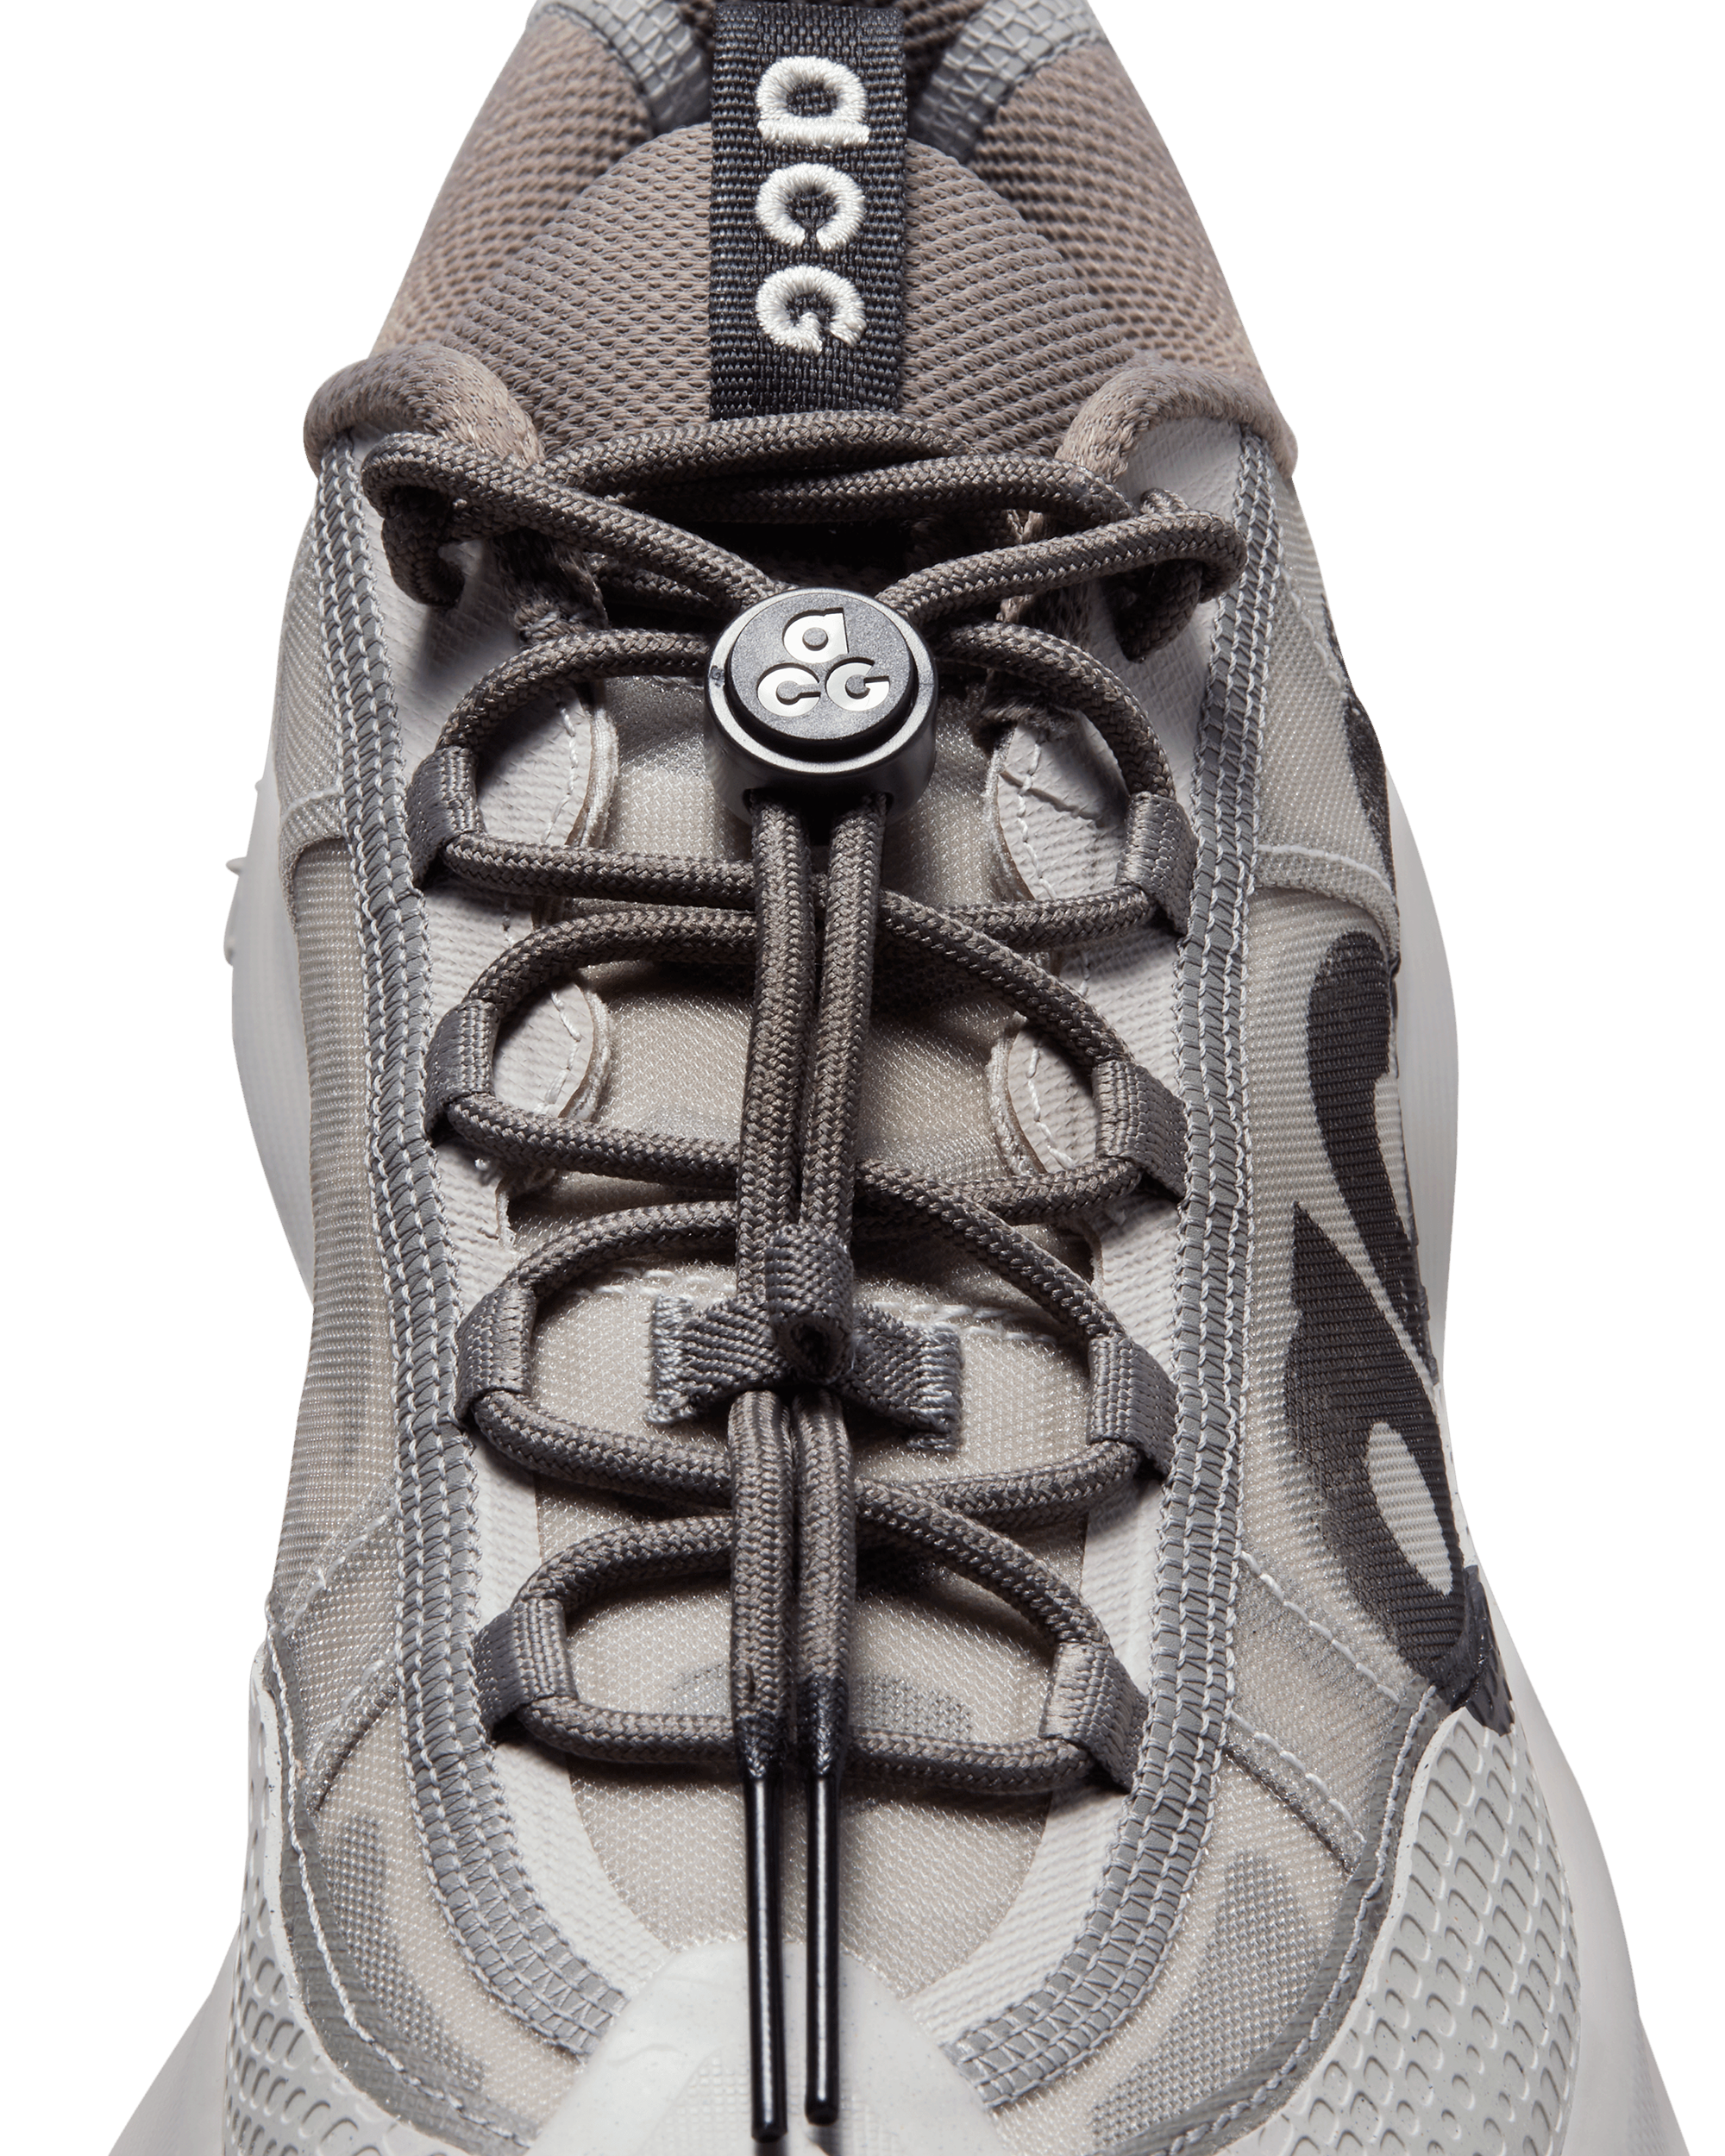 ACG MOUNTAIN FLY 2 LOW - LT IRON ORE / BLACK FLAT PEWTER